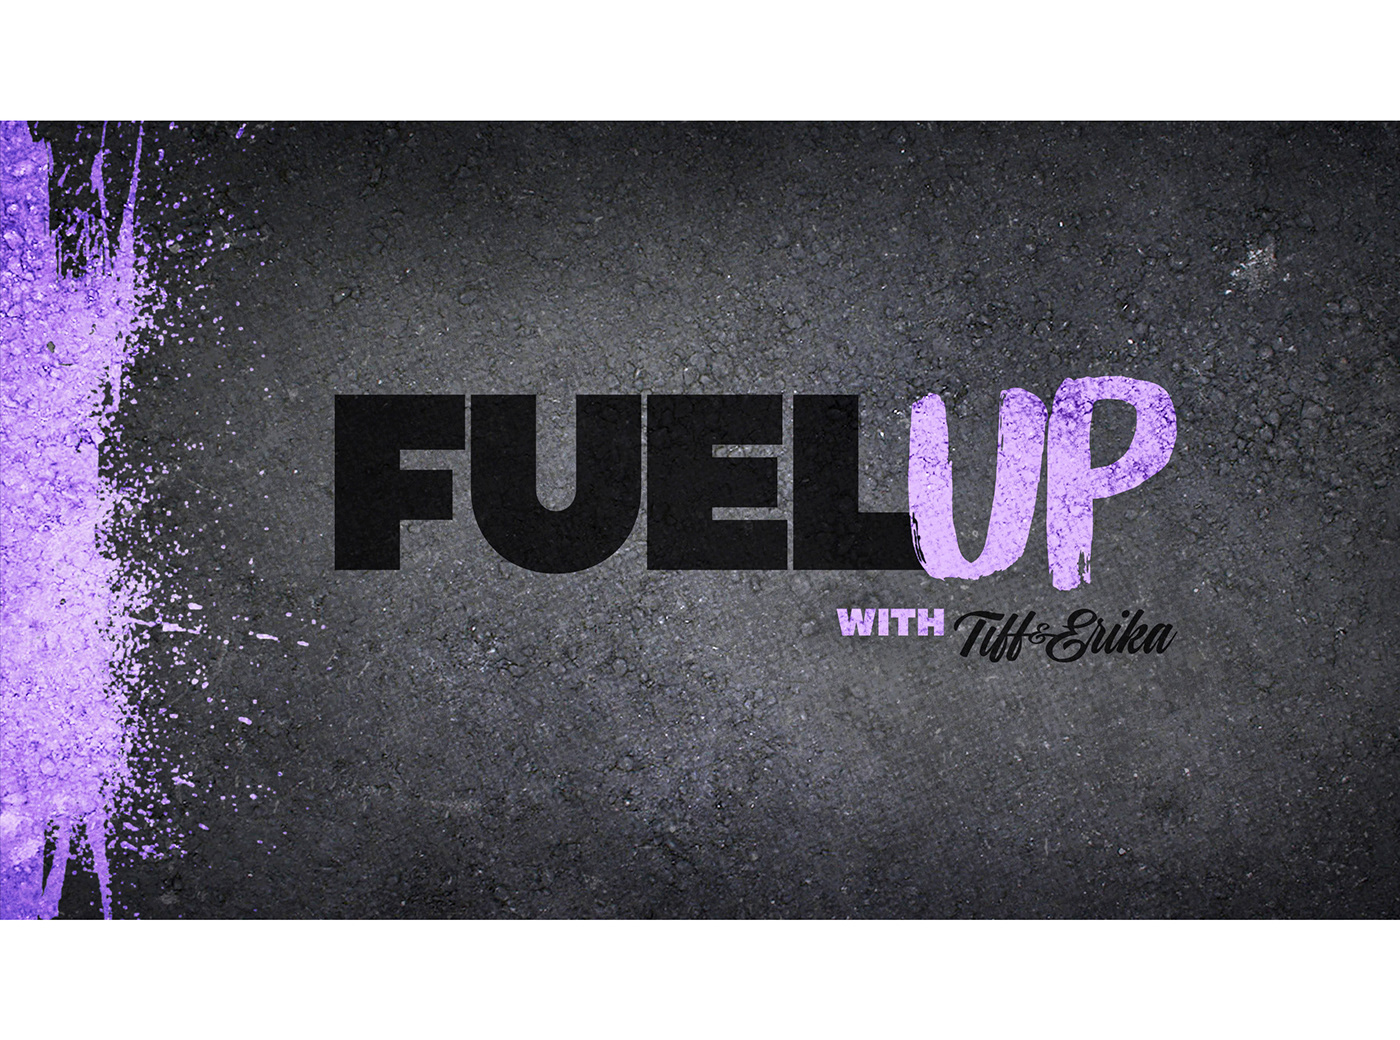 Logo art for Fuel Up by Tiff & Erika.